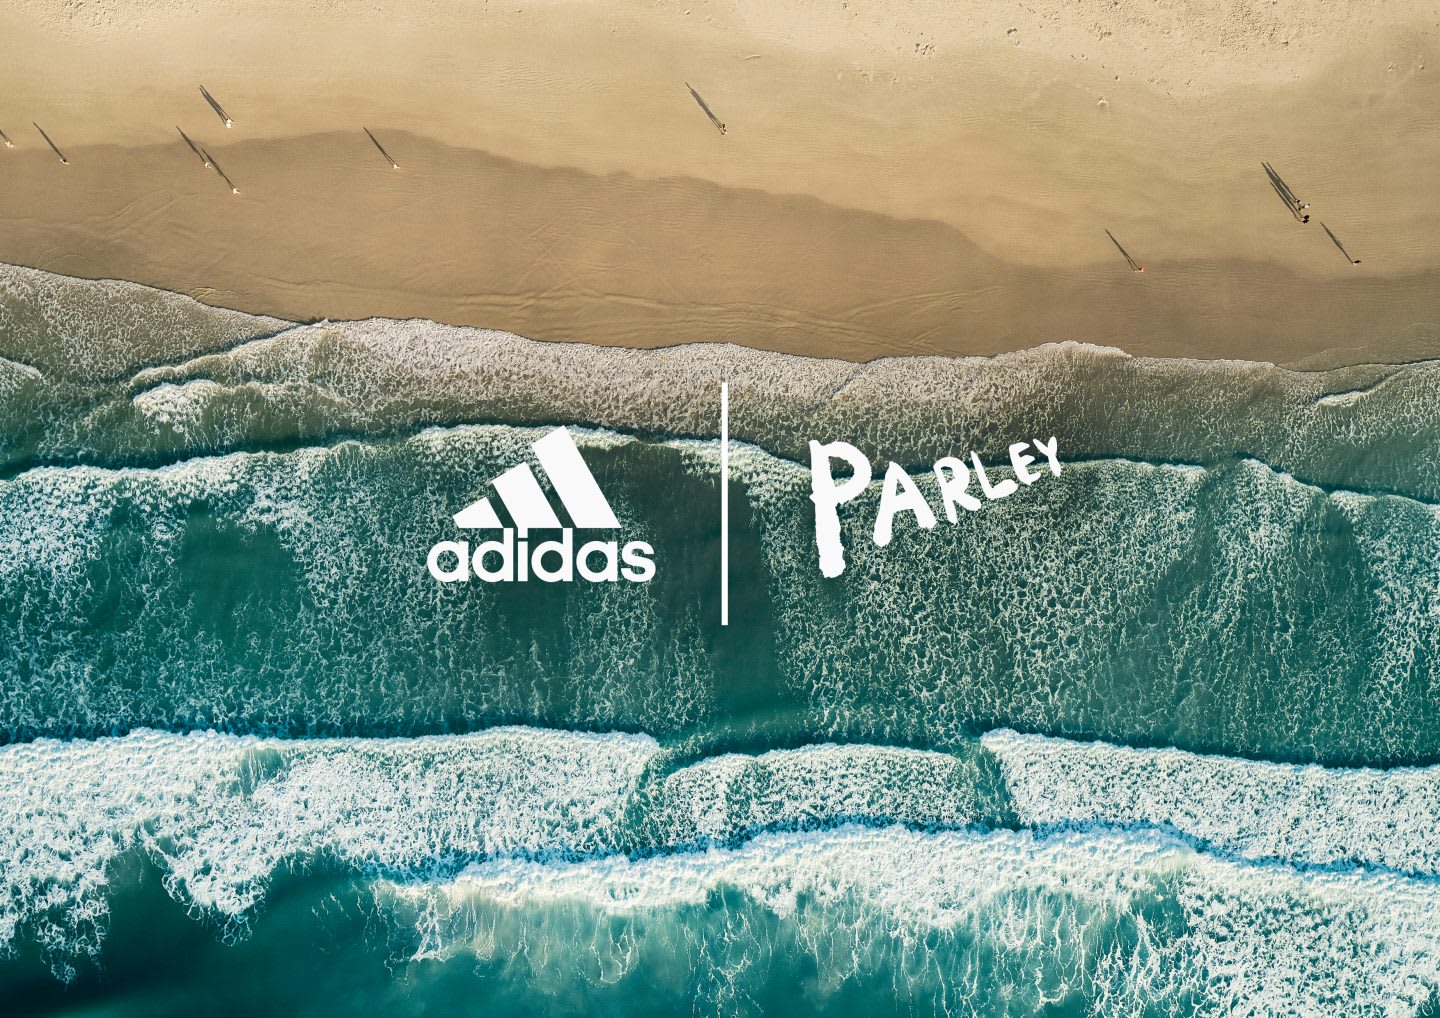 adidas x Parley – Turning Plastic Pollution into Sustainable Fashion adidas GamePlan A | adidas GamePlan A